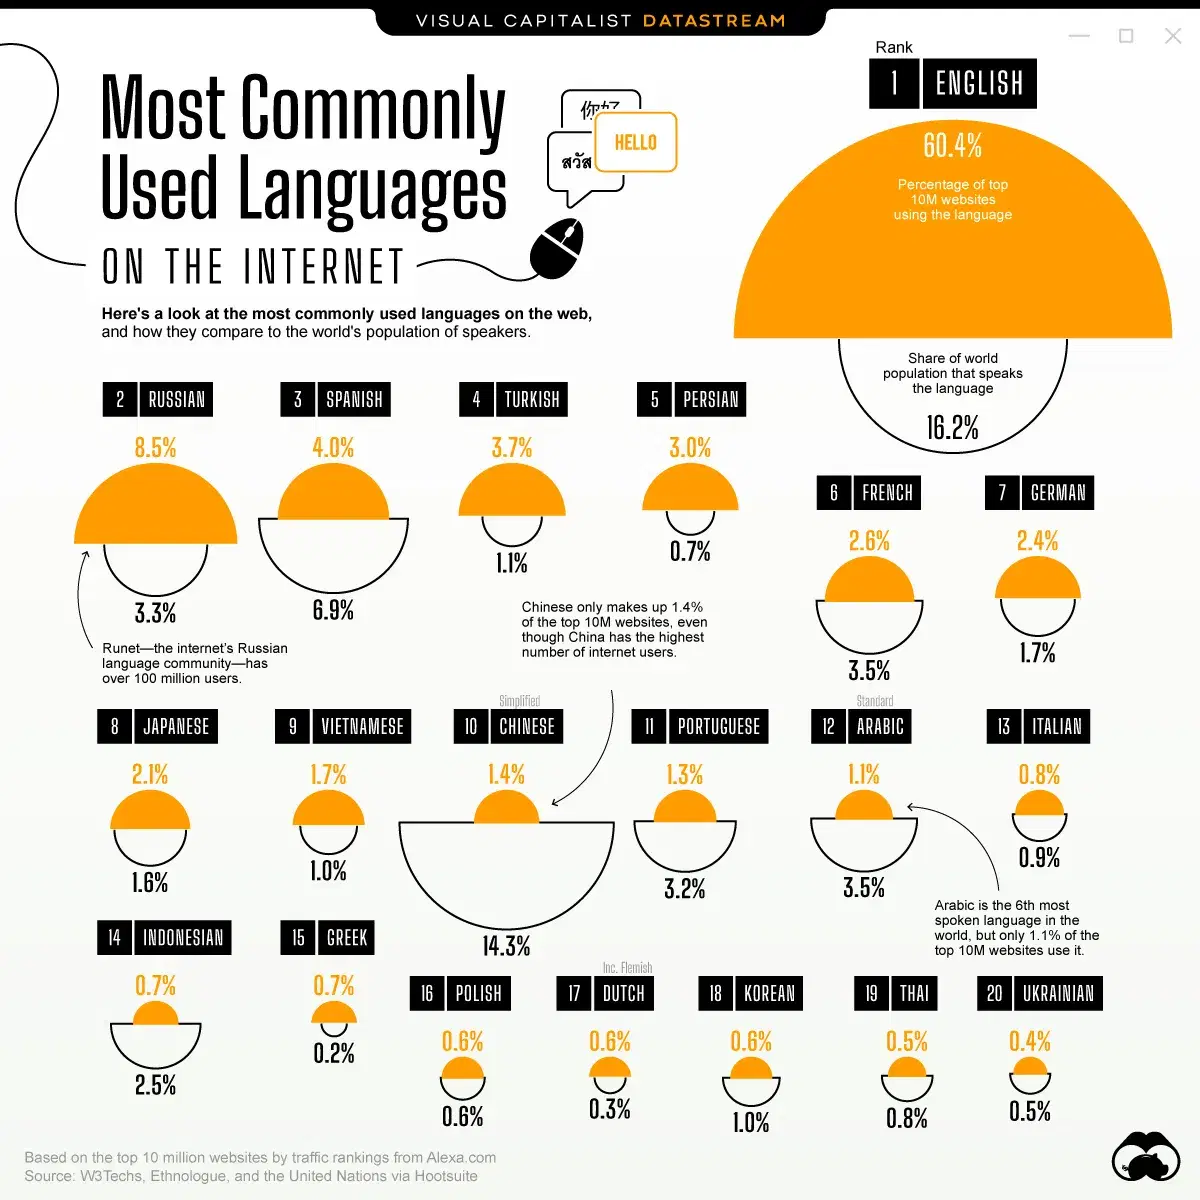 Visualizing the Most Used Languages on the Internet